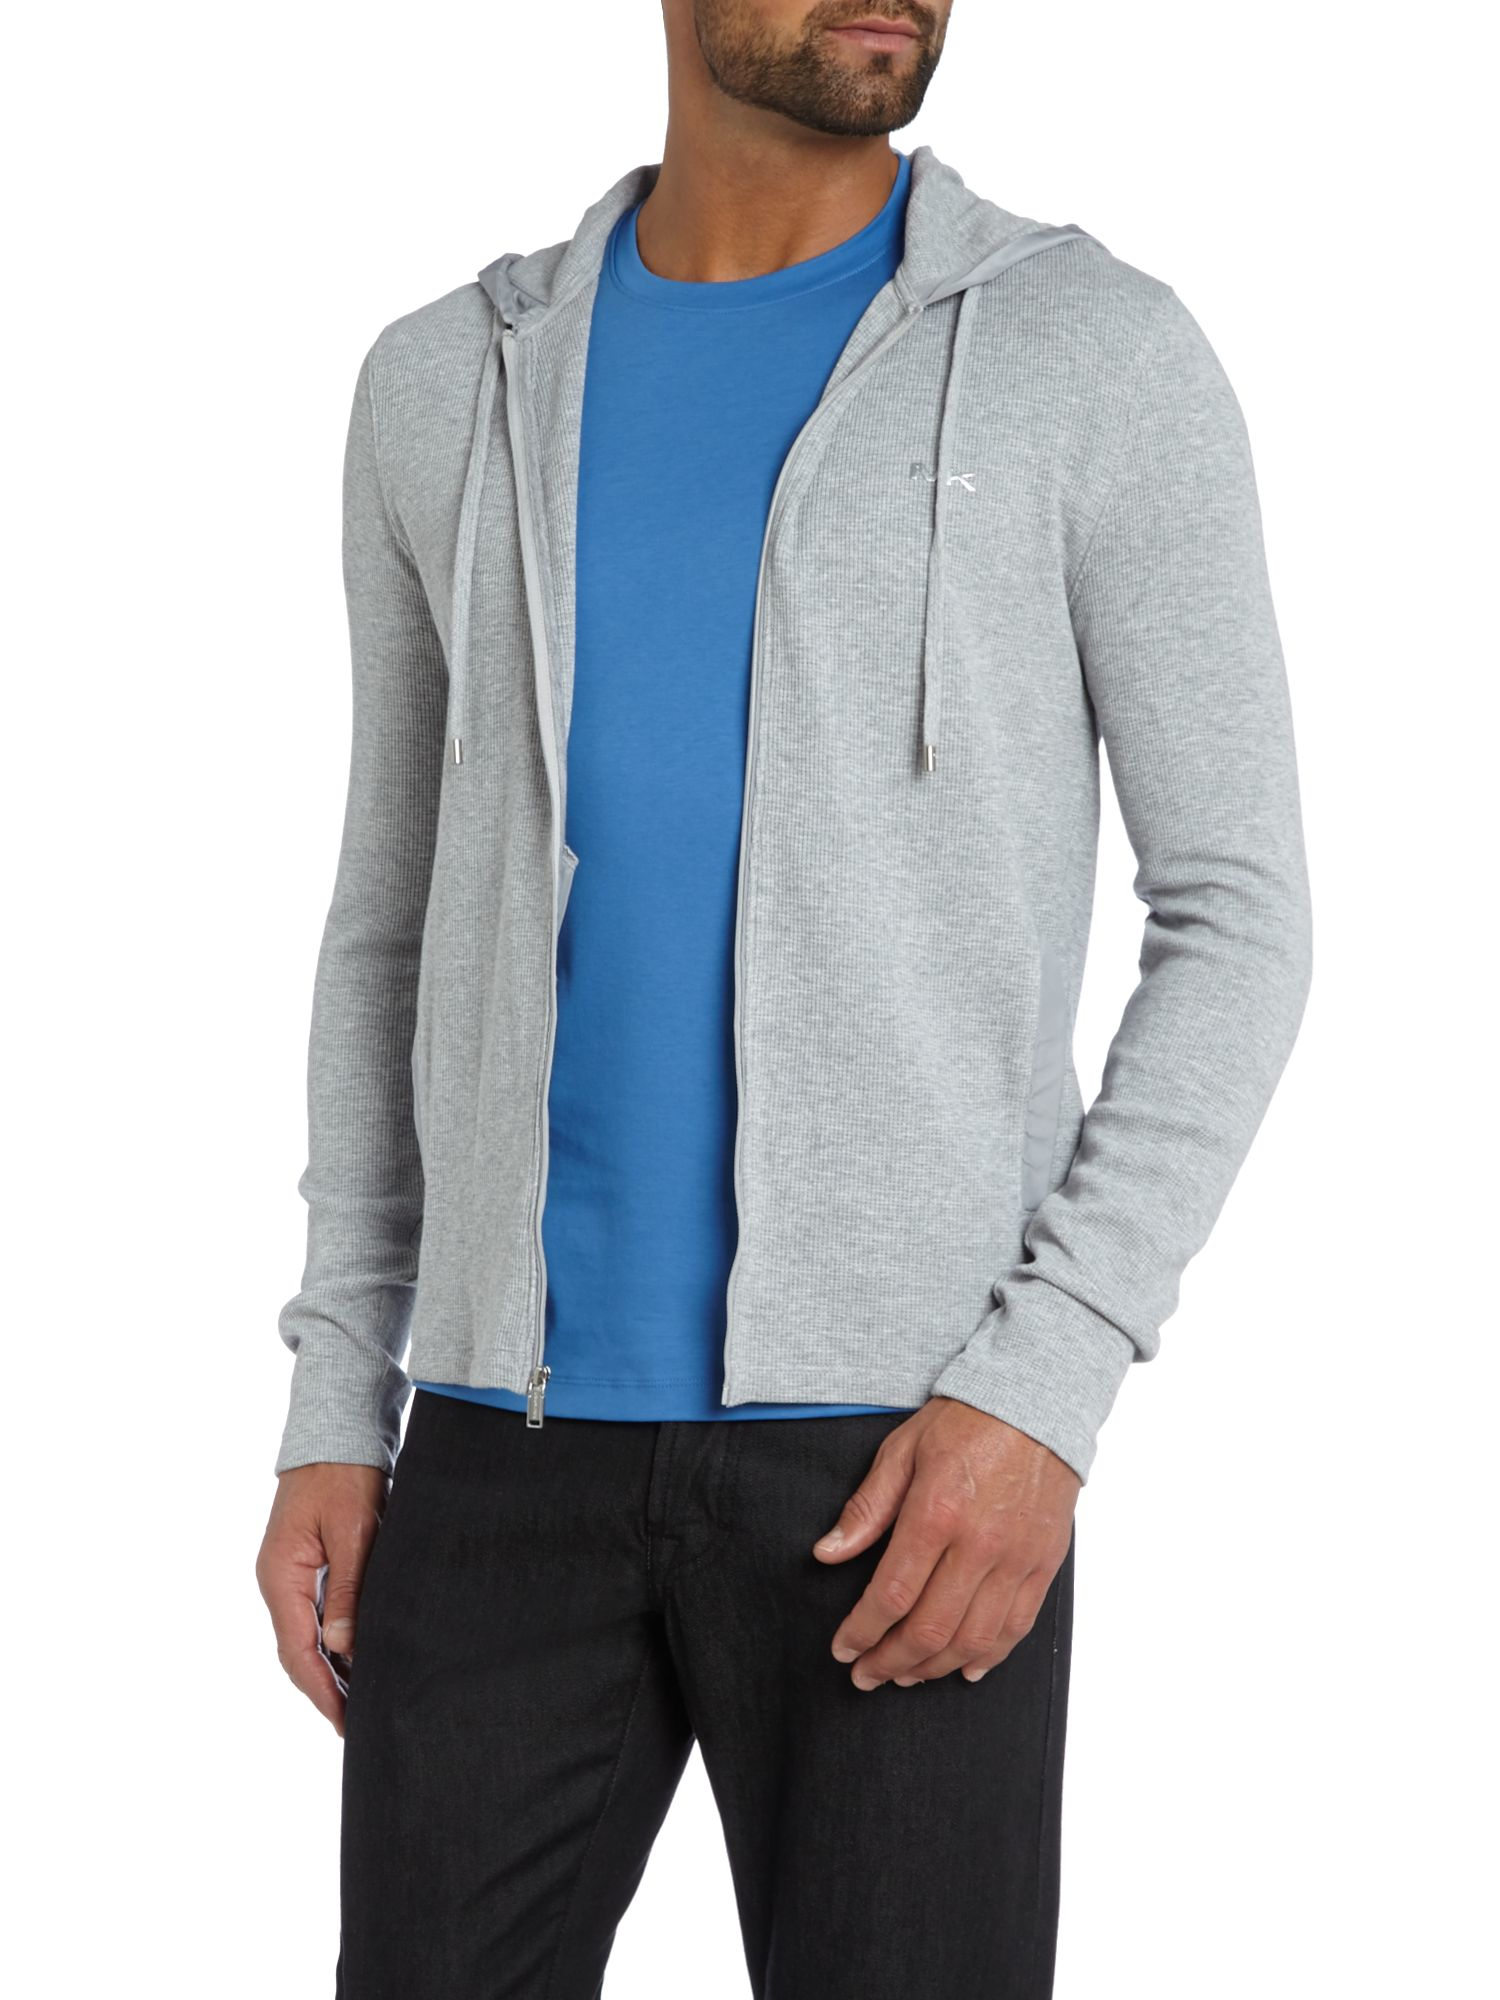 Michael kors Zip Up Waffle Hooded Jacket in Gray for Men (Heather) | Lyst